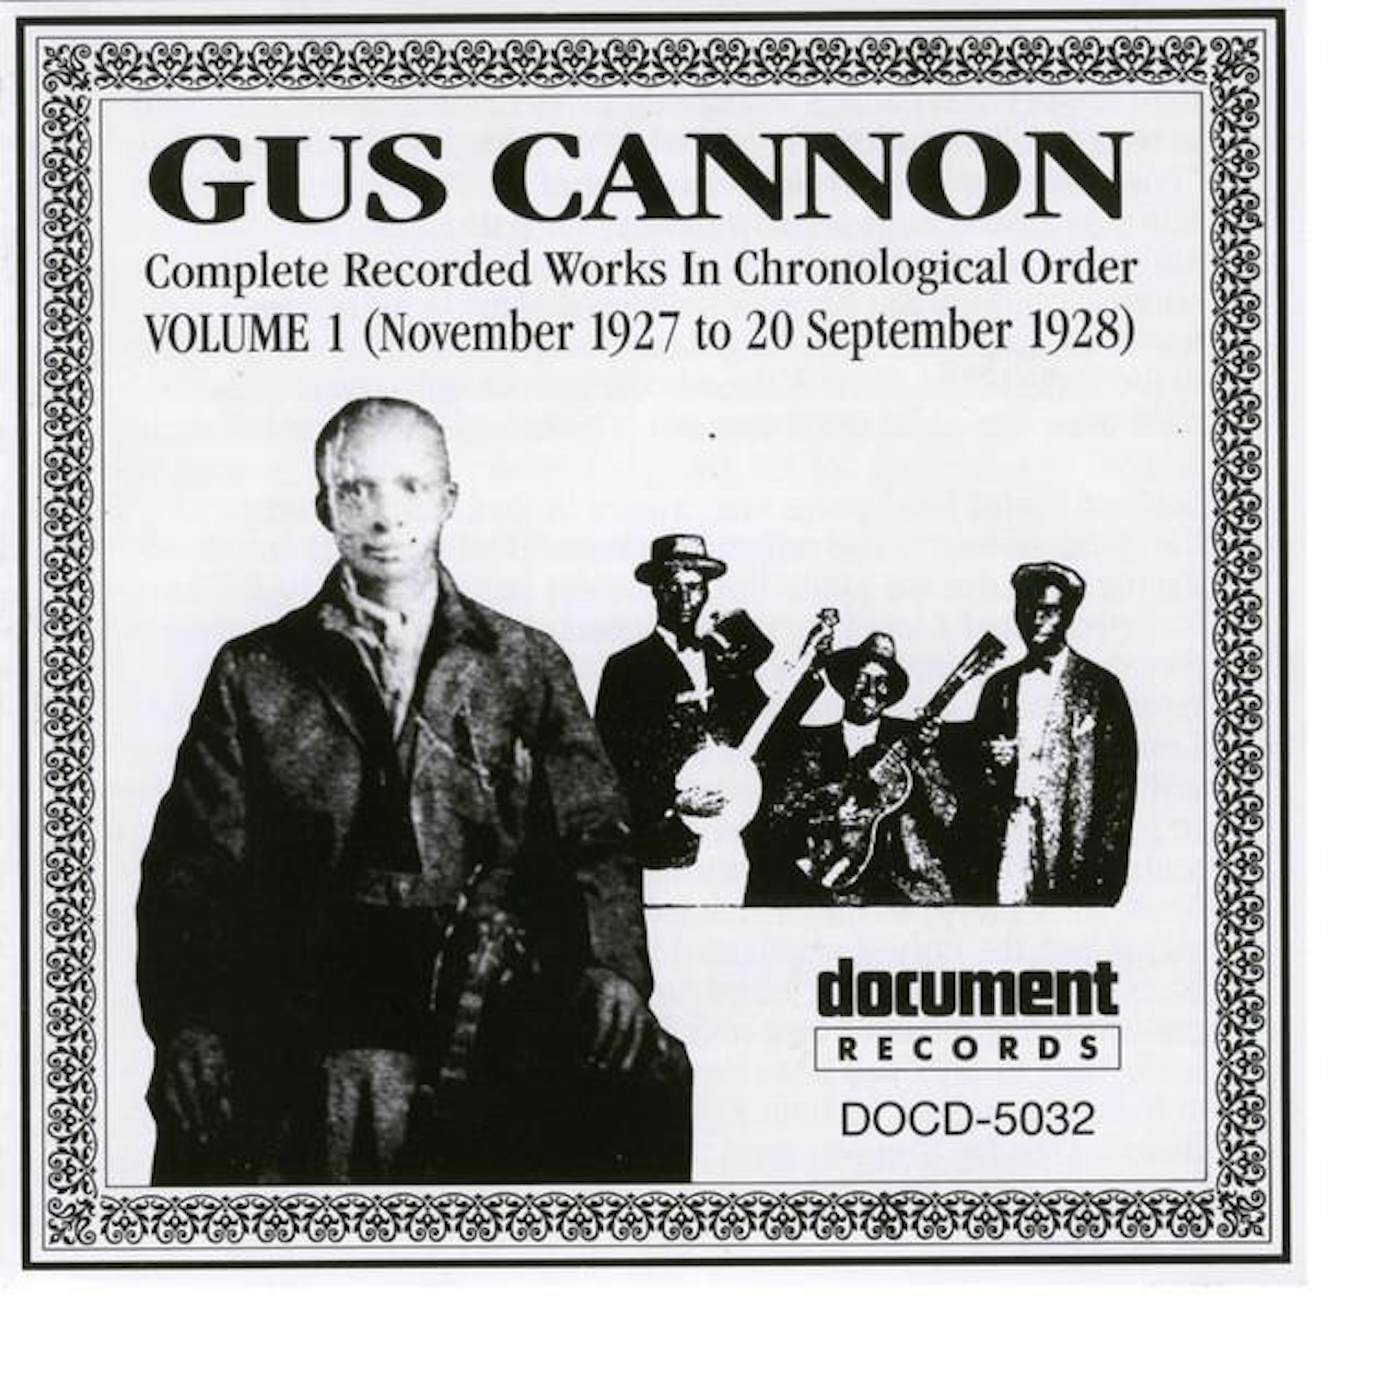 Gus Cannon